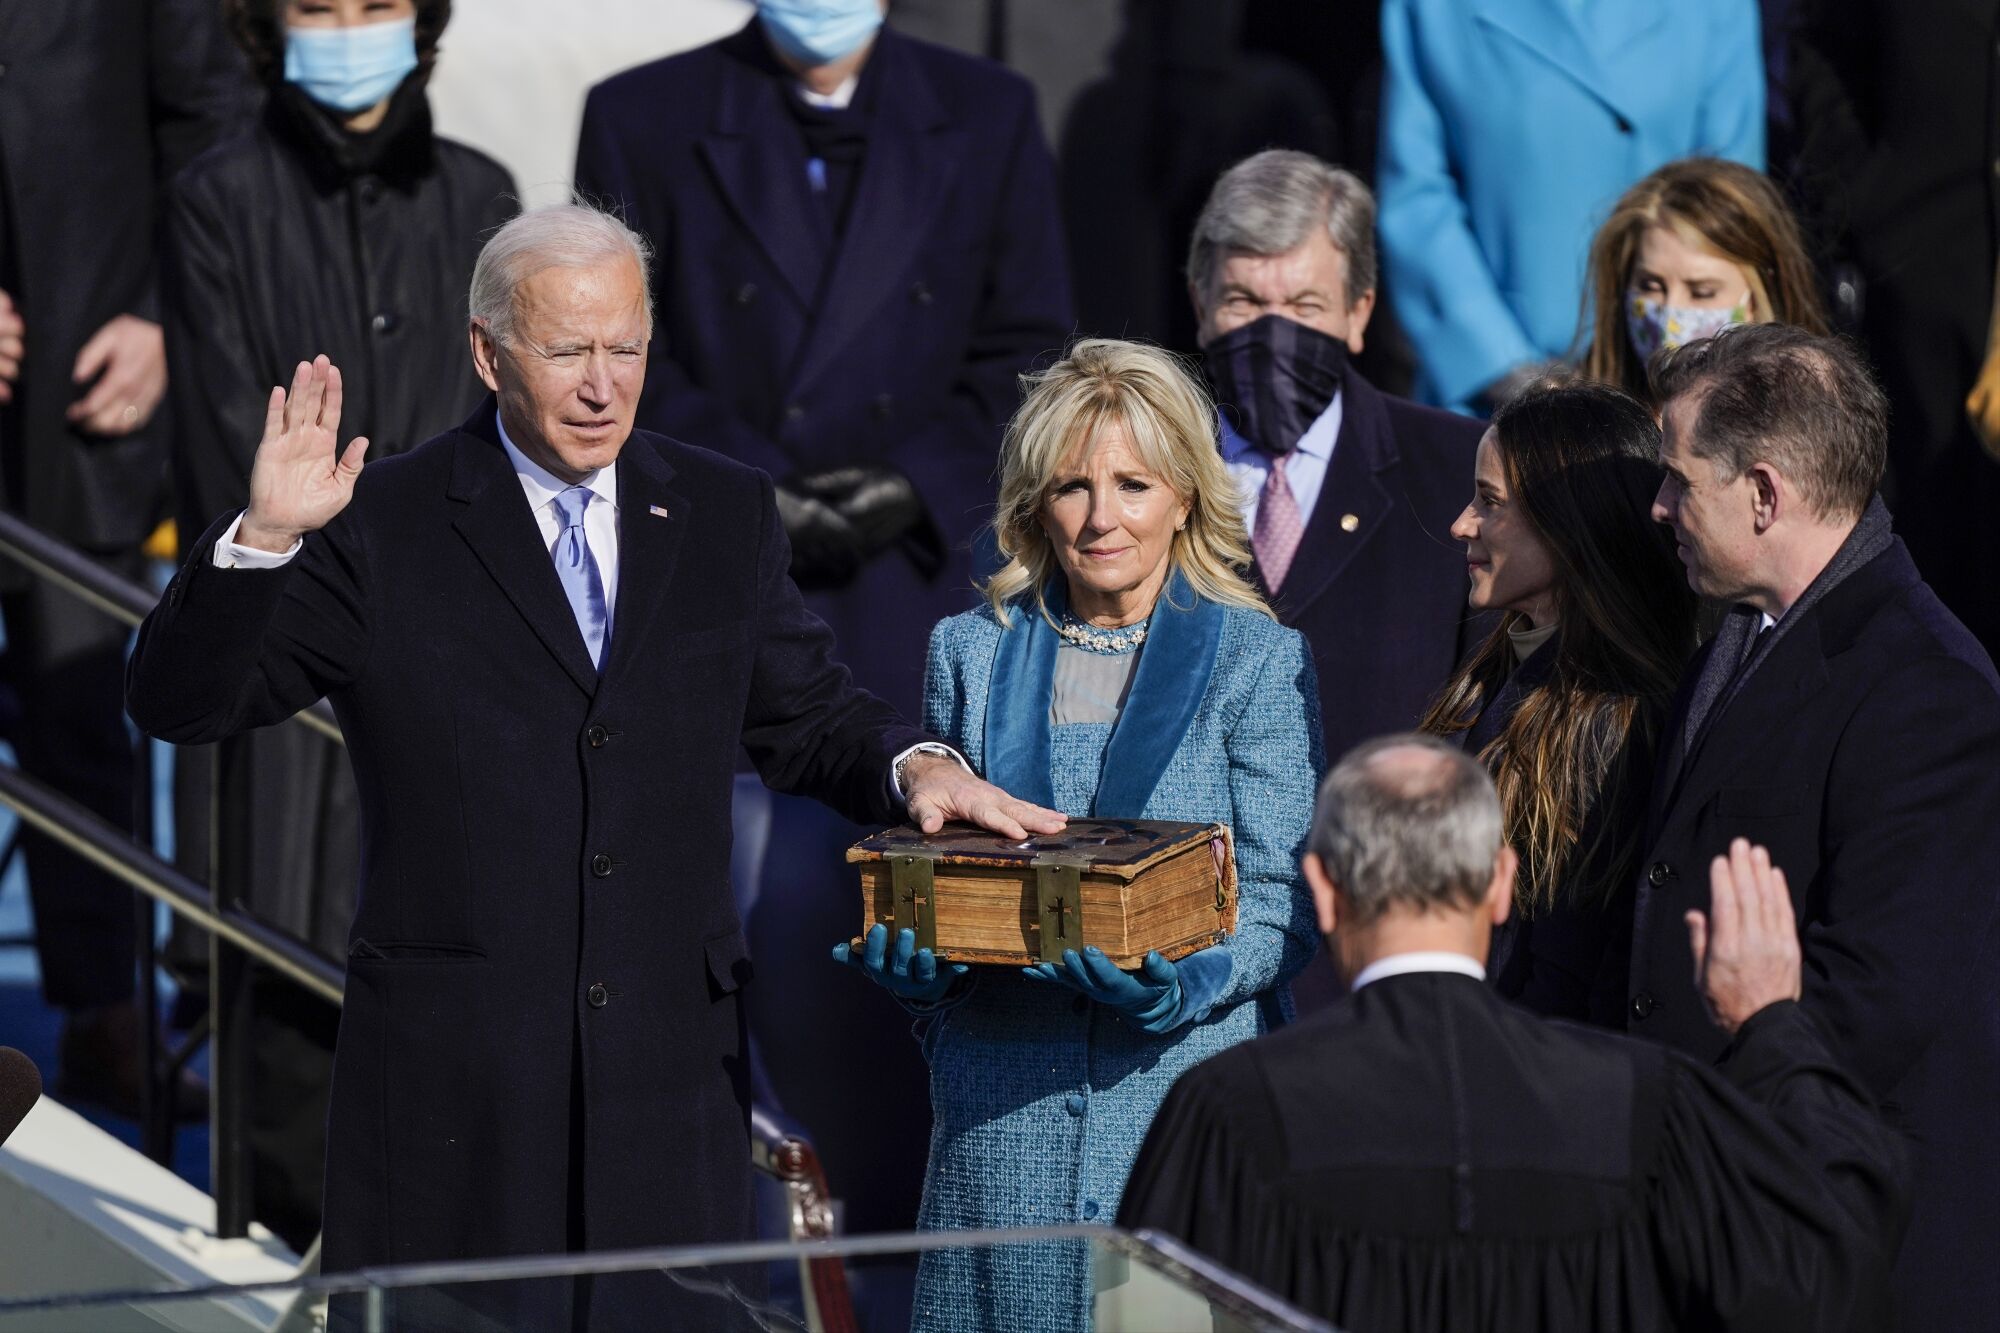 Joe Biden is sworn in as the 46th president of the United States.